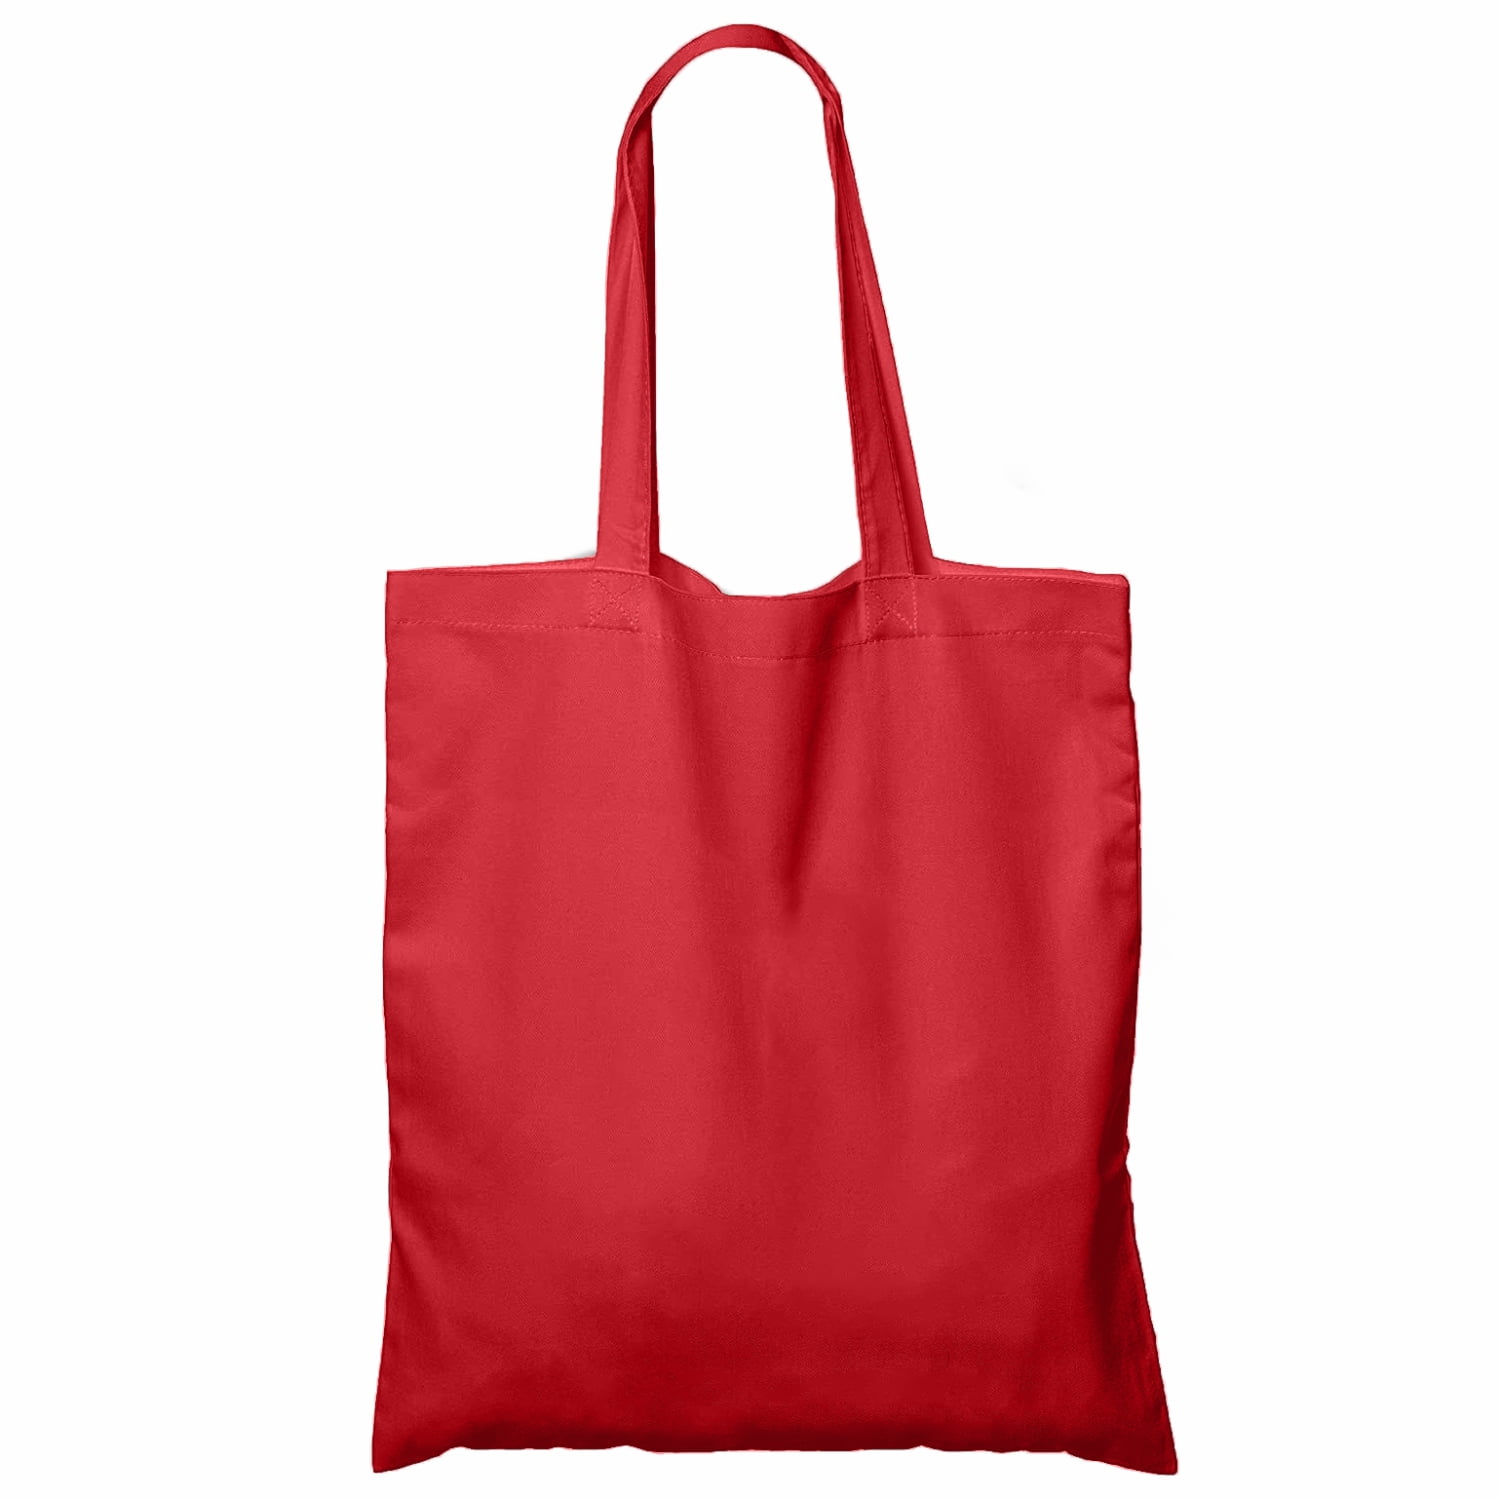 TOPDesign 24-Pack Economical 16x15 White Cotton Tote Bag